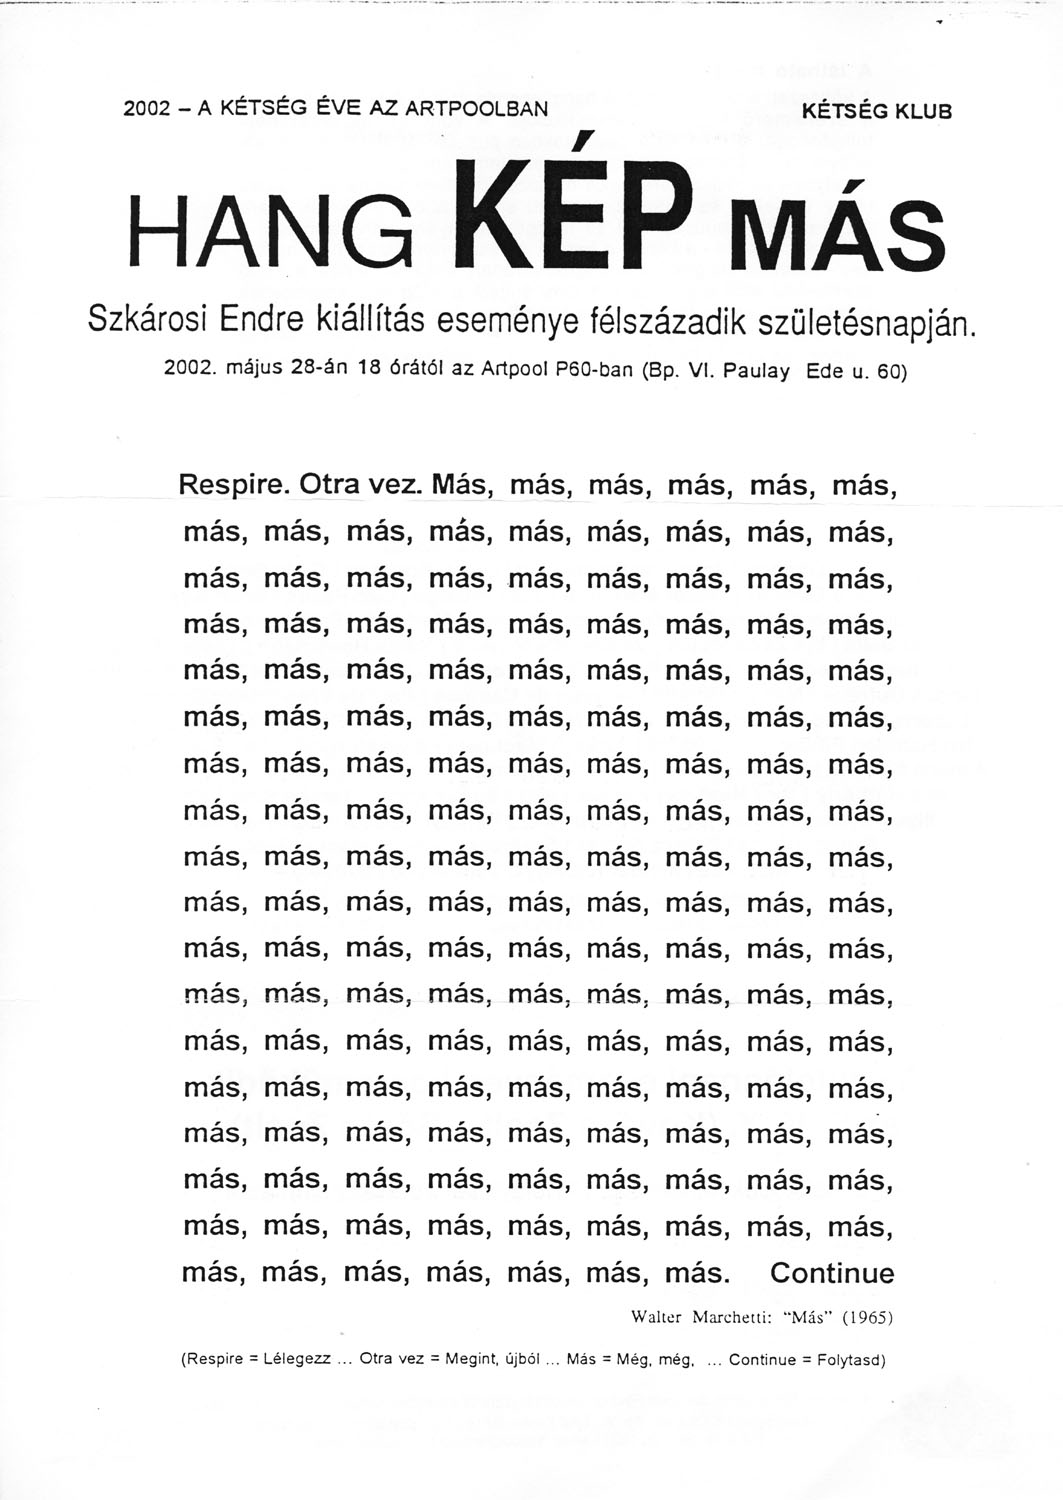 Invitation  for the exhibition HANG KÉP MÁS / SOUND IMAGE POETRY, Artpool P60, Budapest, 2002 (1st page)